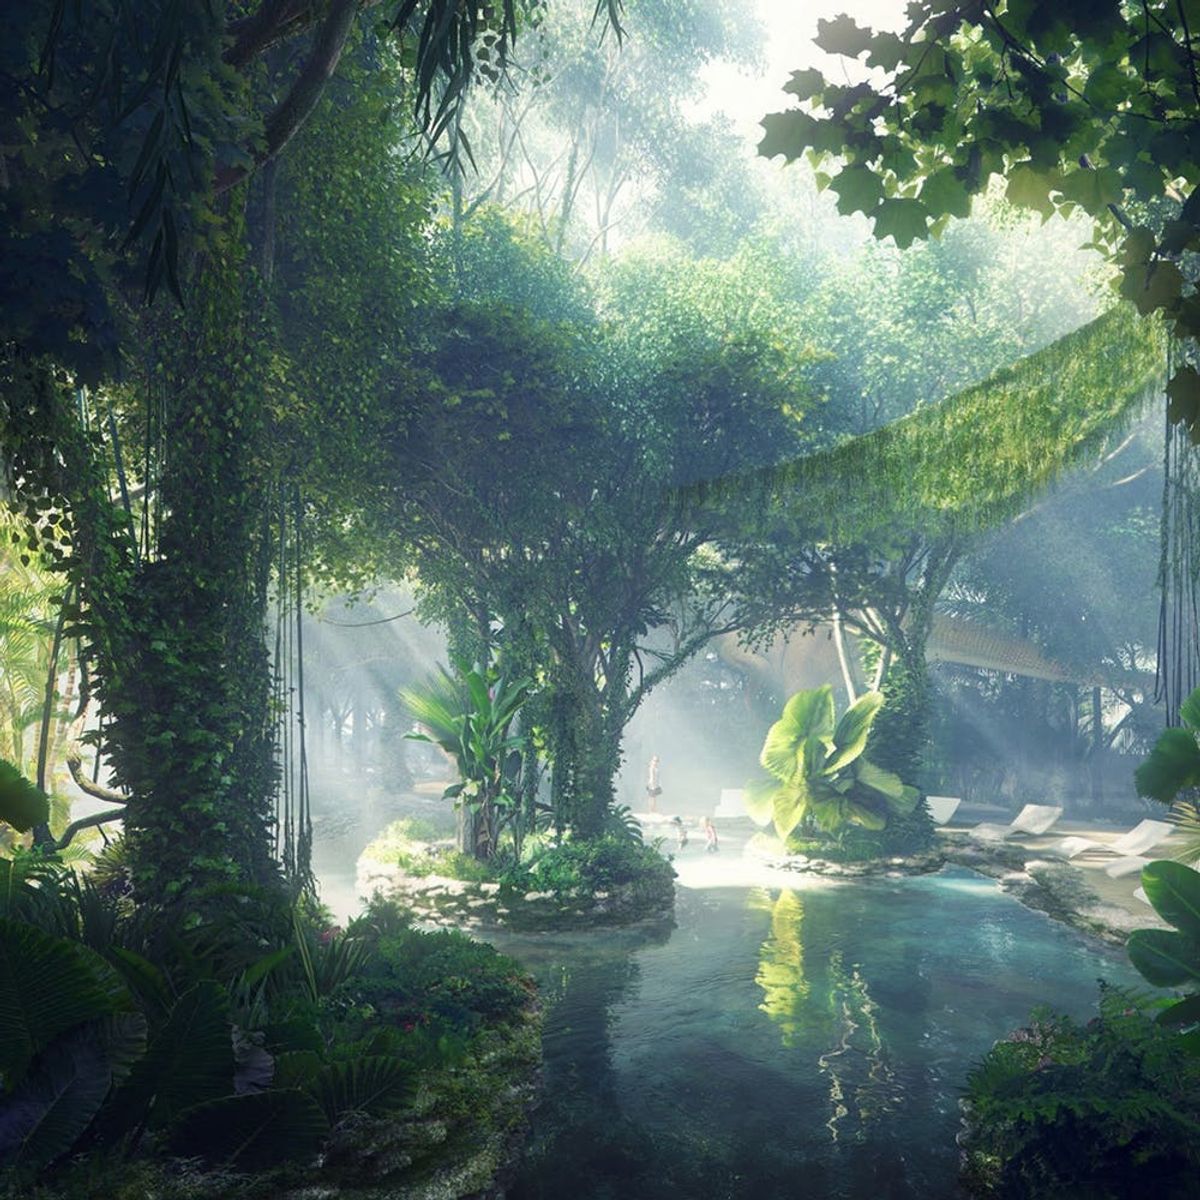 This Epic Hotel Has an ACTUAL Rainforest Inside